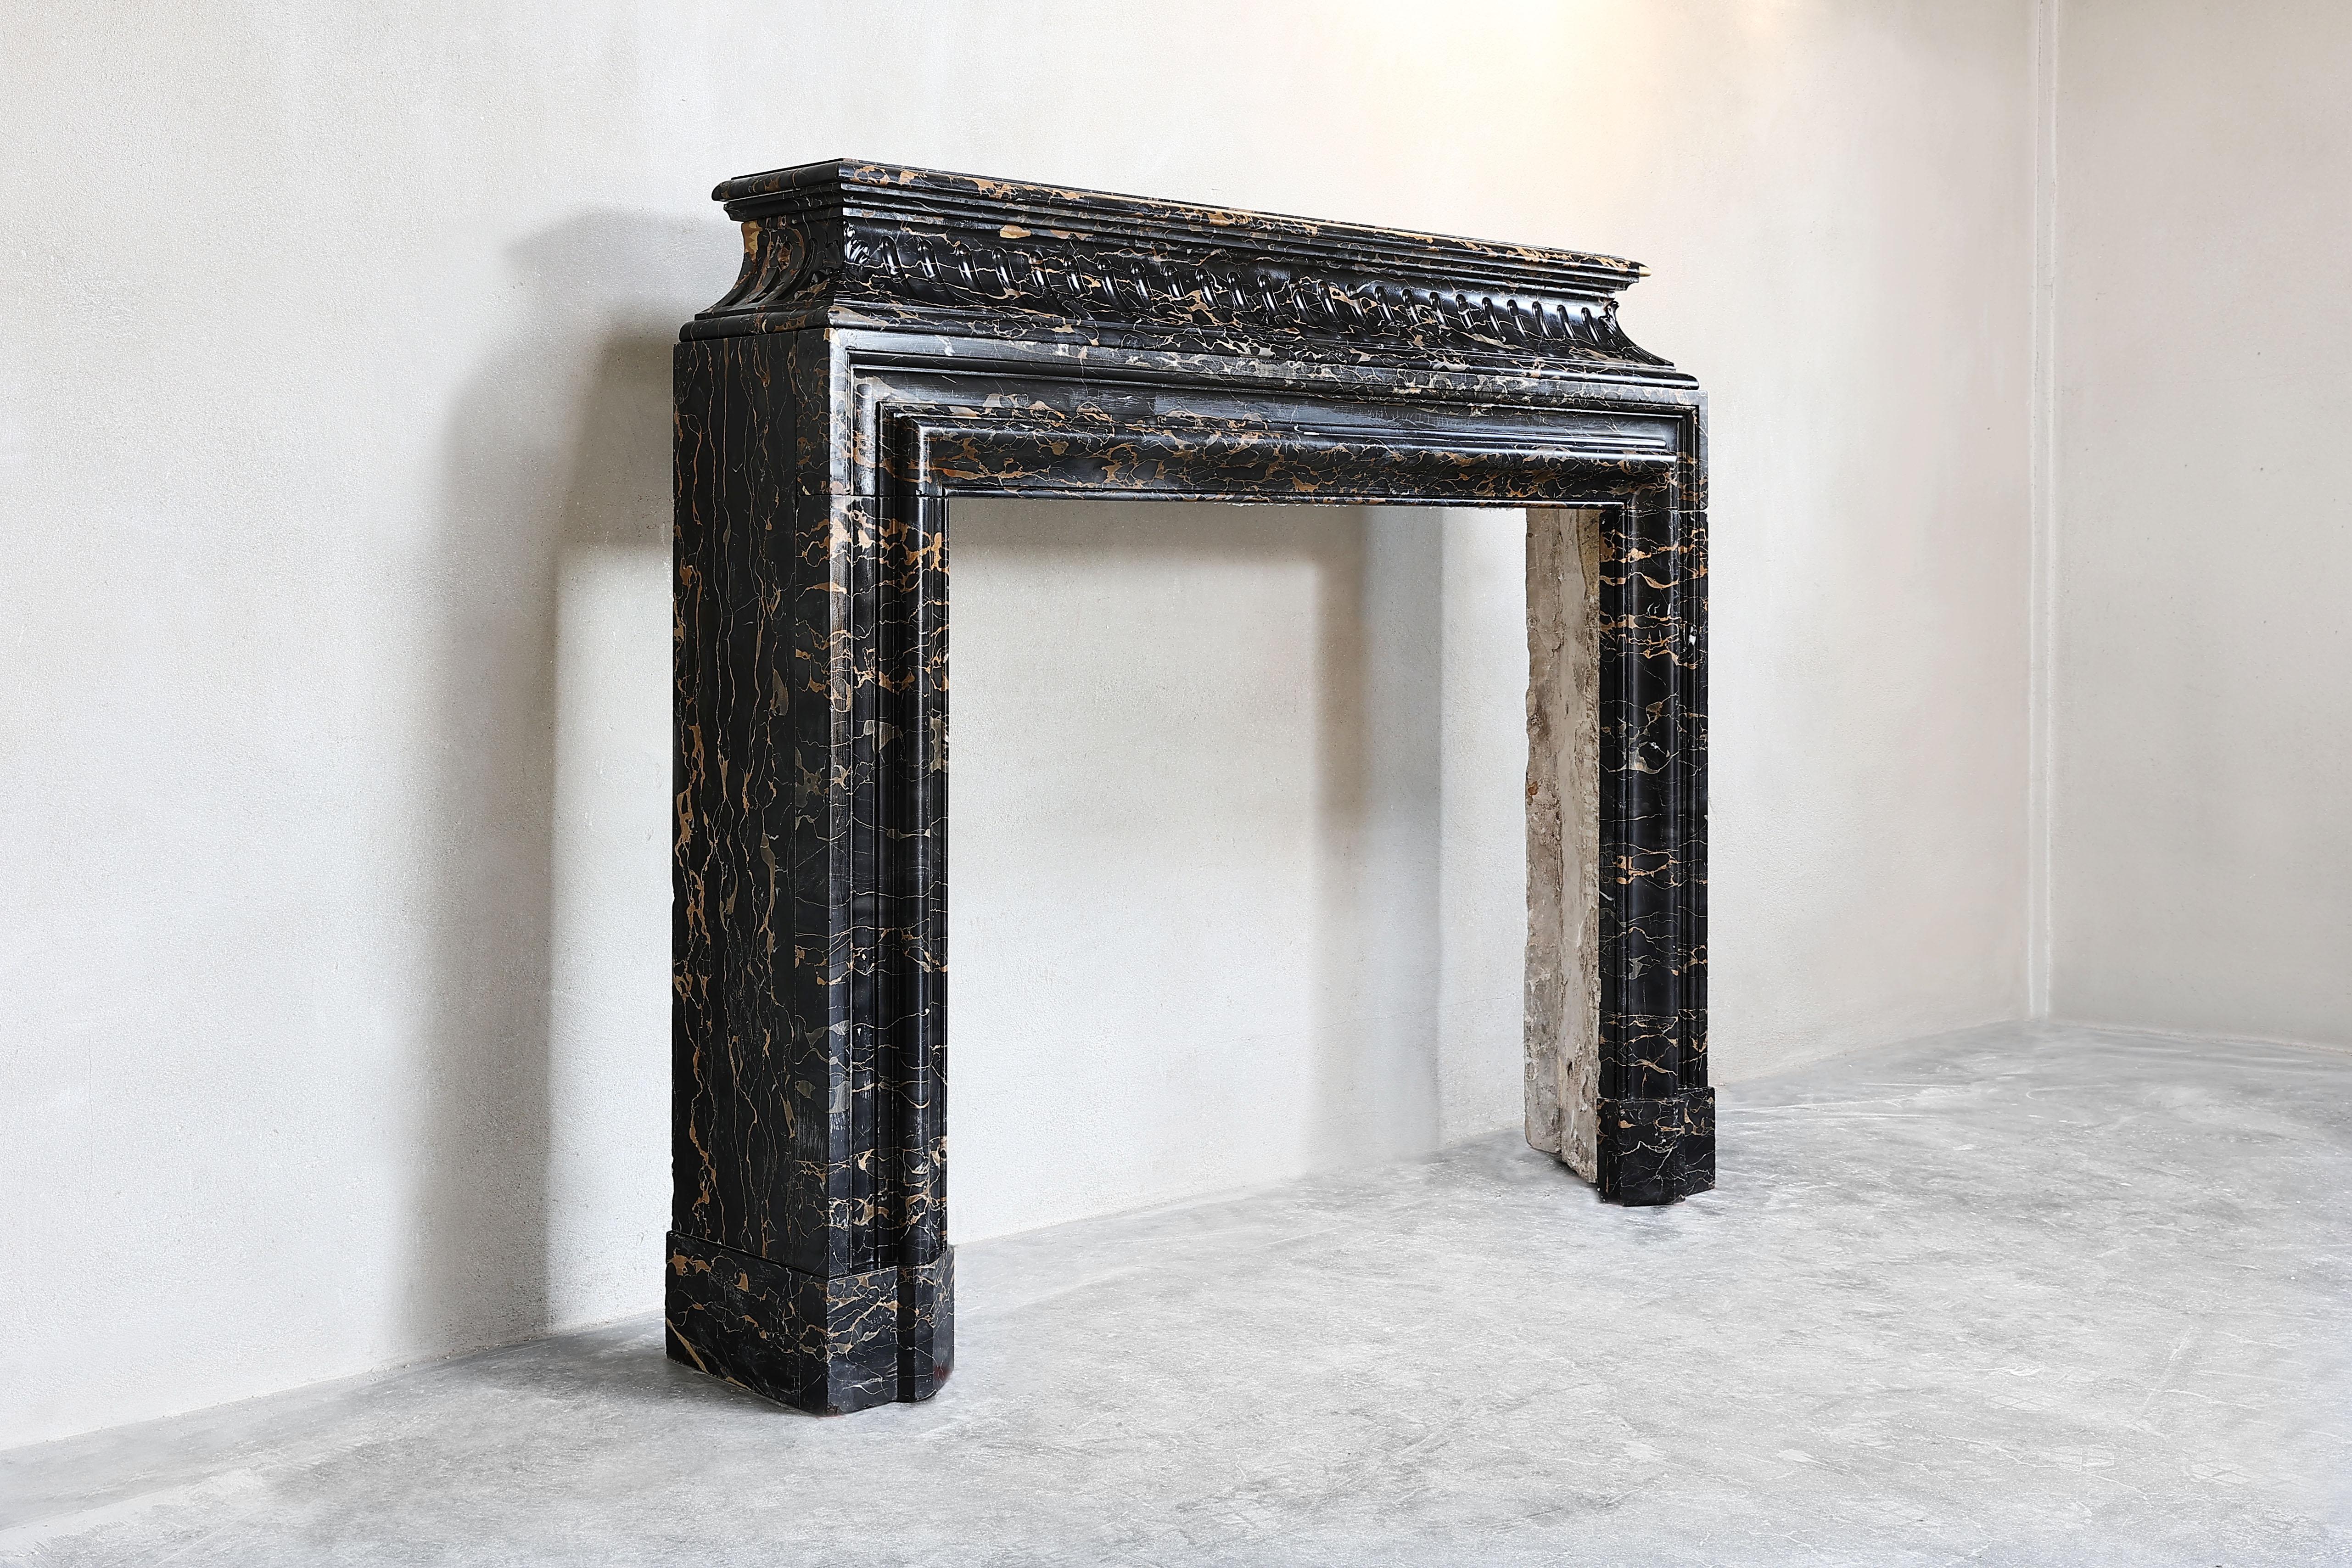 Beautiful unique fireplace of Portoro marble. Portoro marble has its origin in Italy and is a very nice warm marble of dark brown/black with beautiful flamed veins! This antique fireplace dates from the 19th century and is in the style of Louis XVI.